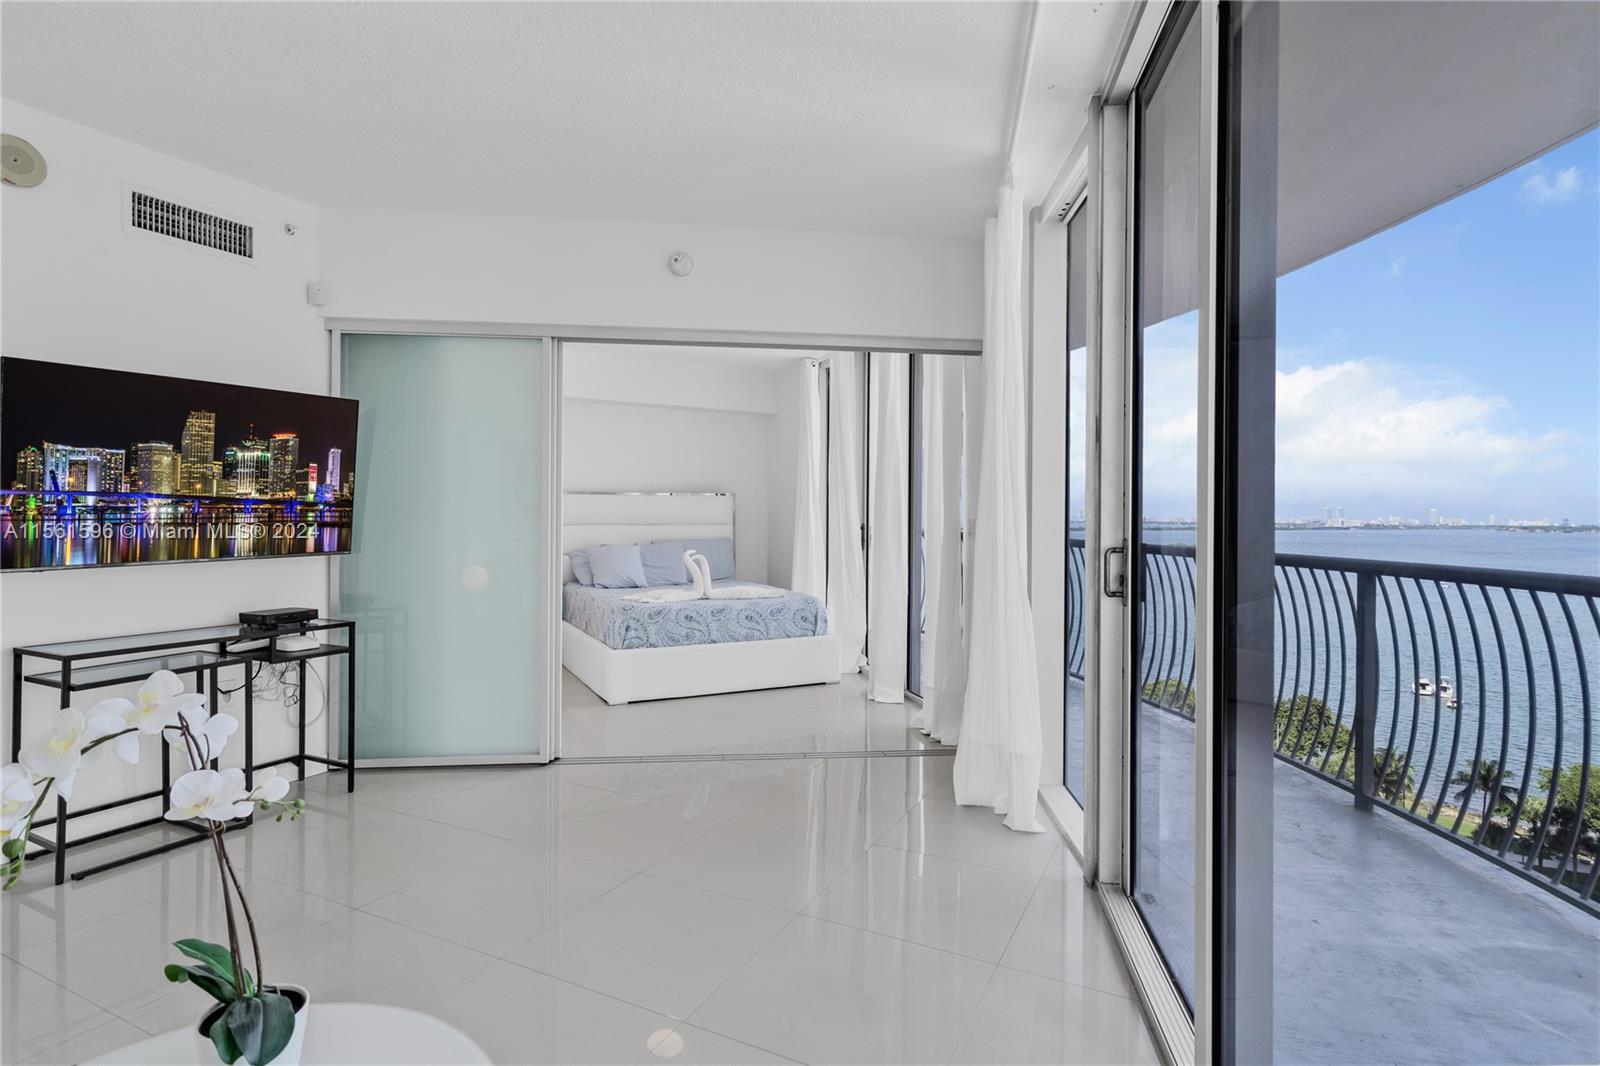 Don't miss this opportunity to lease this impeccable furnished 2bed/2bath. Renovated to meet the highest standards of luxury & comfort with unobstructed water views. High-end finishes throughout, including porcelain floors, stainless steel appliances & quartz countertops. Enjoy the beauty of Biscayne Bay from your private balcony, watch boats go by & soak up the sun. The perfect place to unwind after a long day or to entertain friends & family. If you're looking for a place to call home in Miami, there's no better location. This vibrant neighborhood has everything you need to live the luxurious lifestyle you deserve. Perfect for anyone who wants to be close to all that the city has to offer, minutes away from some of Miami's best restaurants, shops &
entertainment venues.